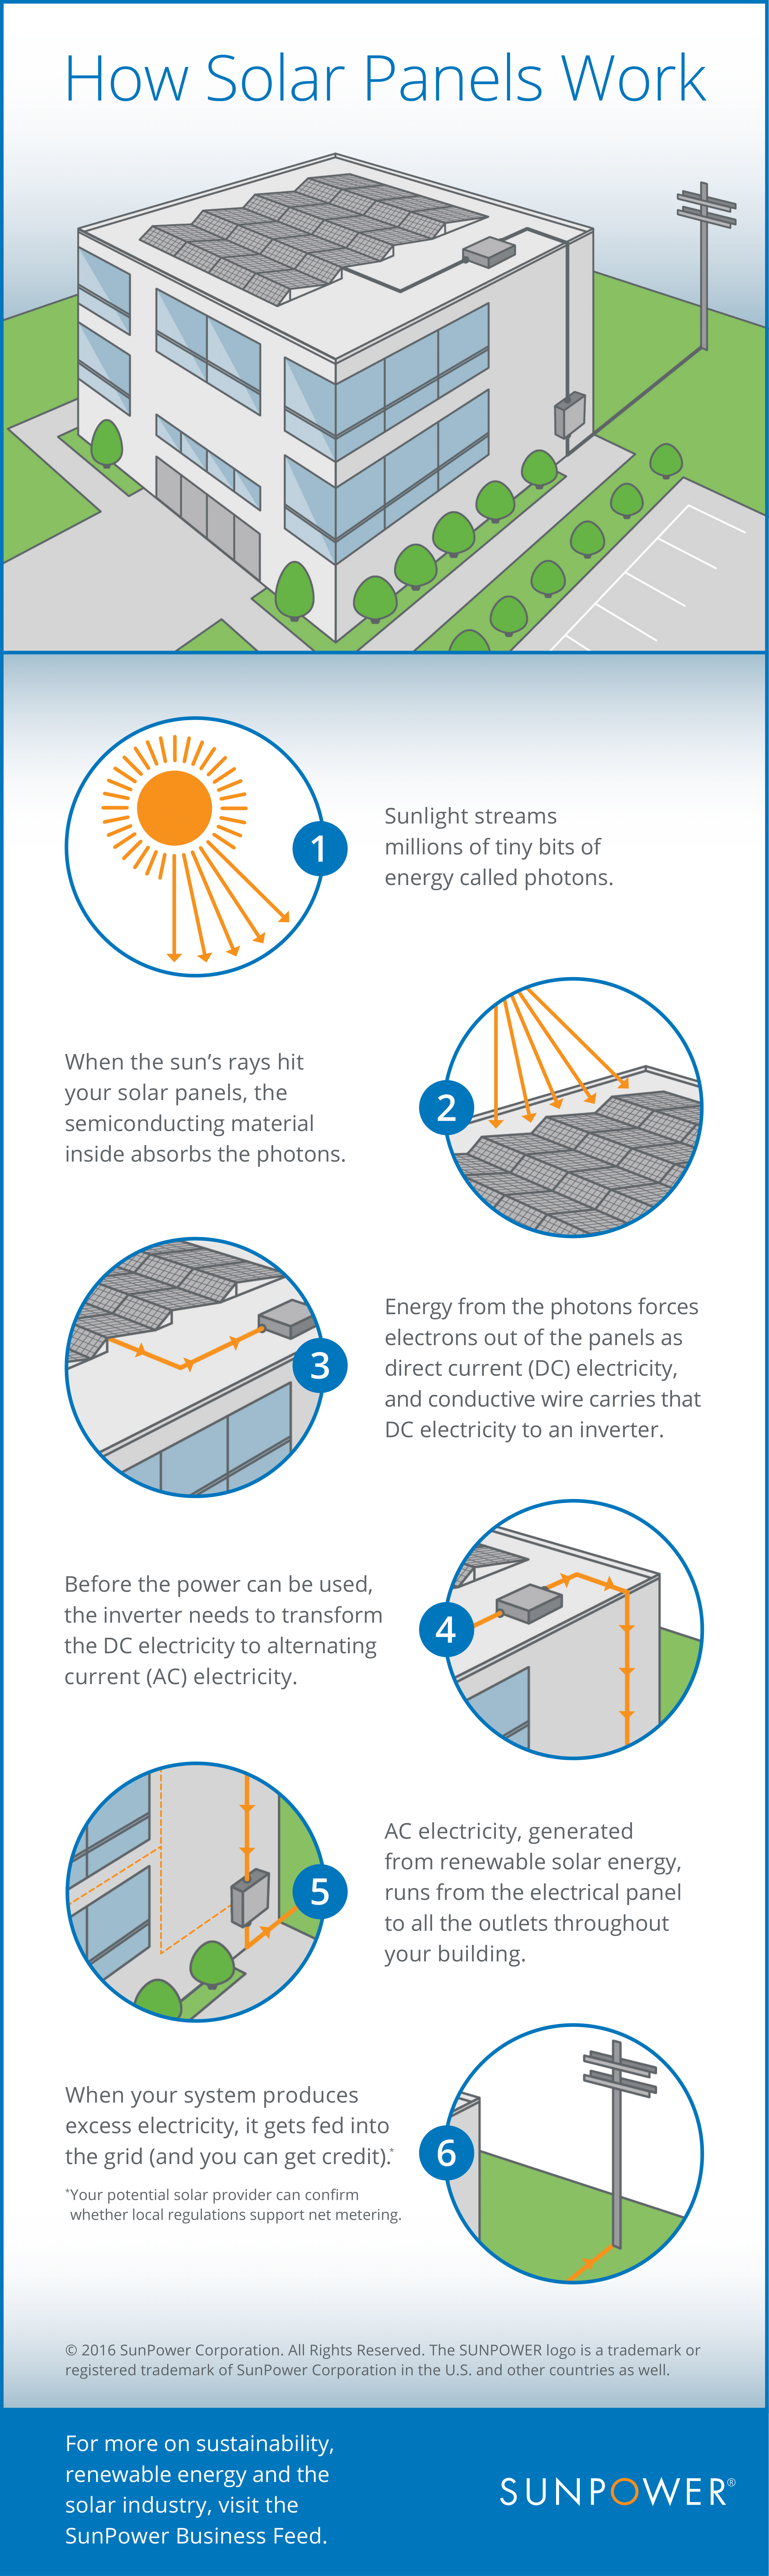 How Solar Panels Work - Commercial-1.png